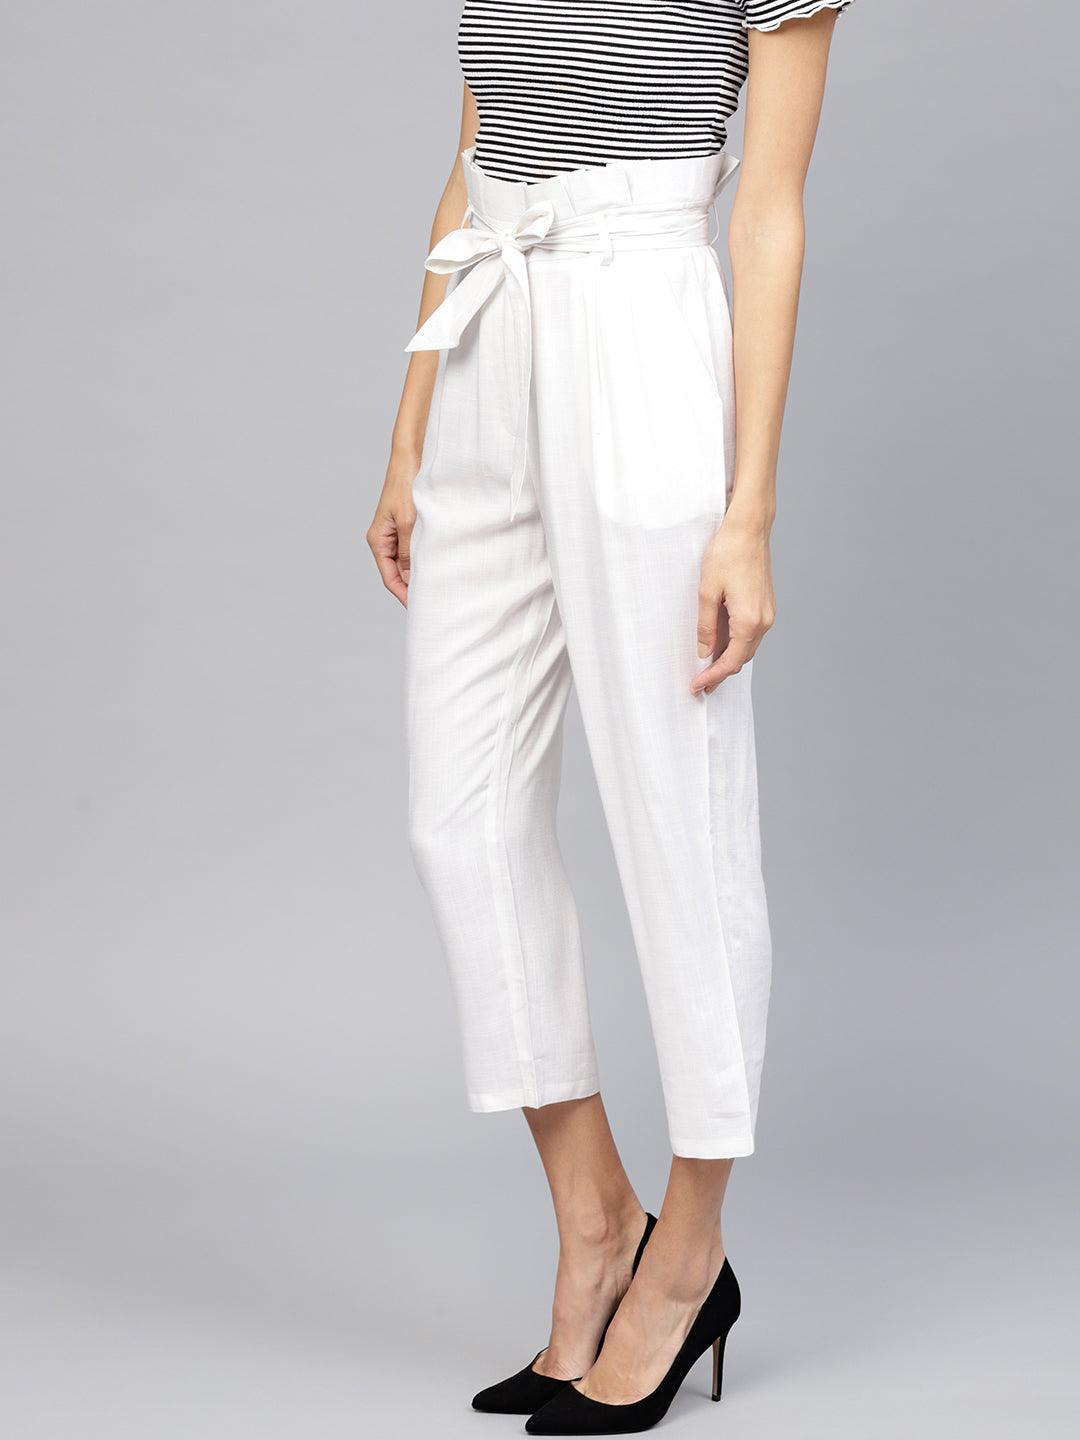 White Solid Rayon Trousers - Libas